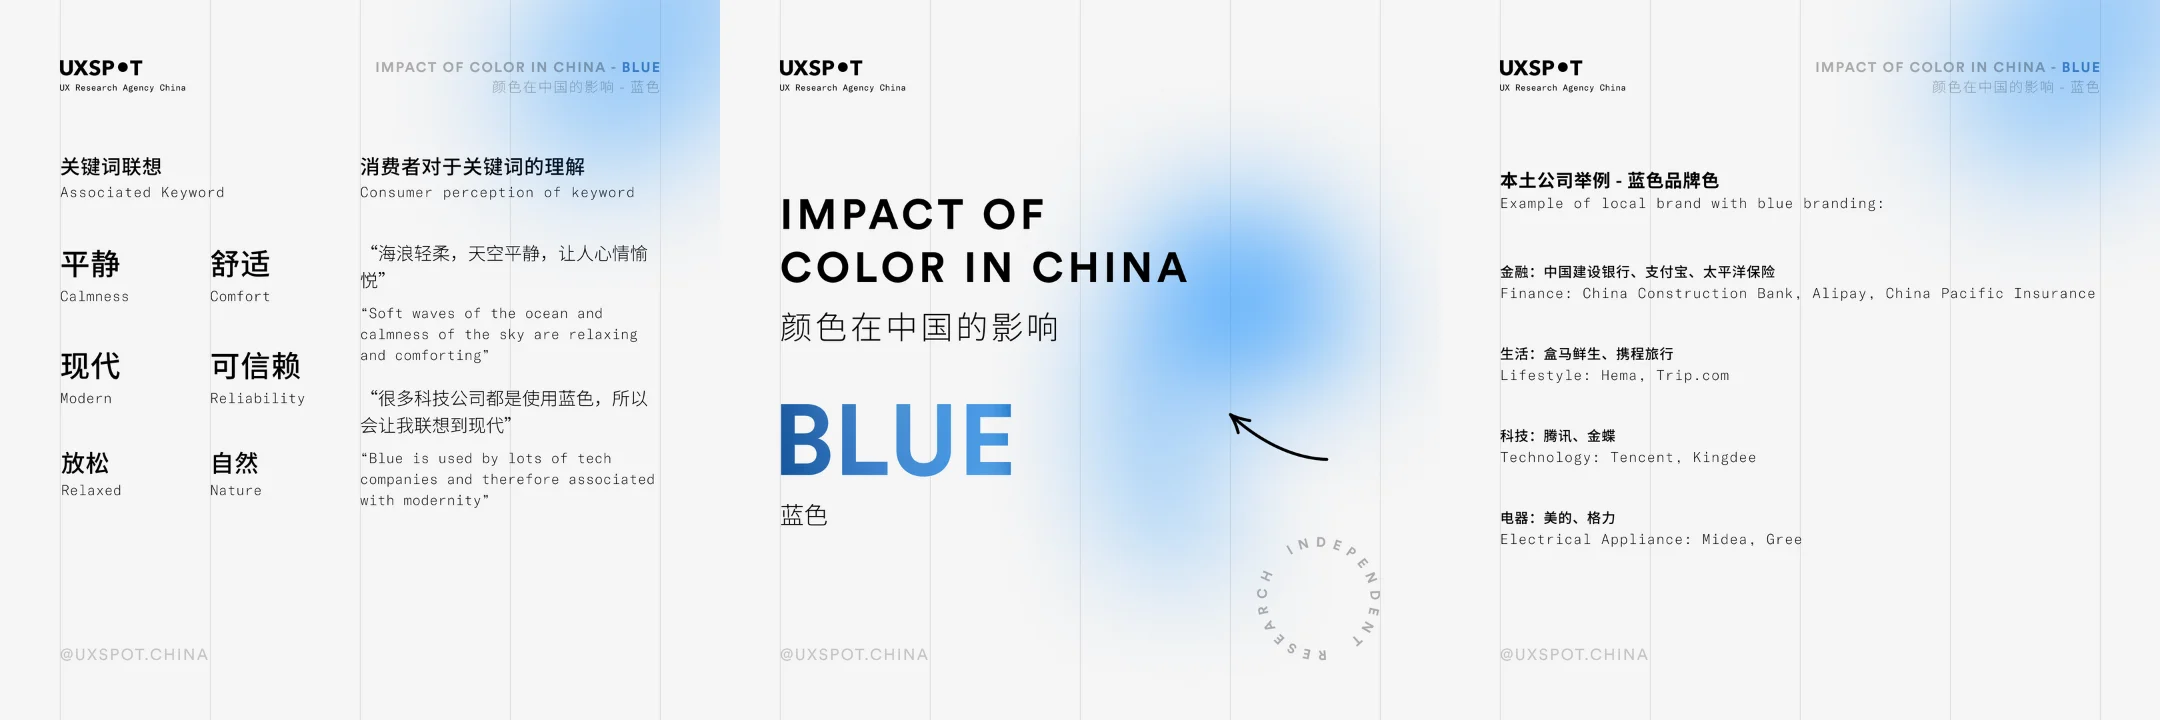 color psychology China color blue data summary